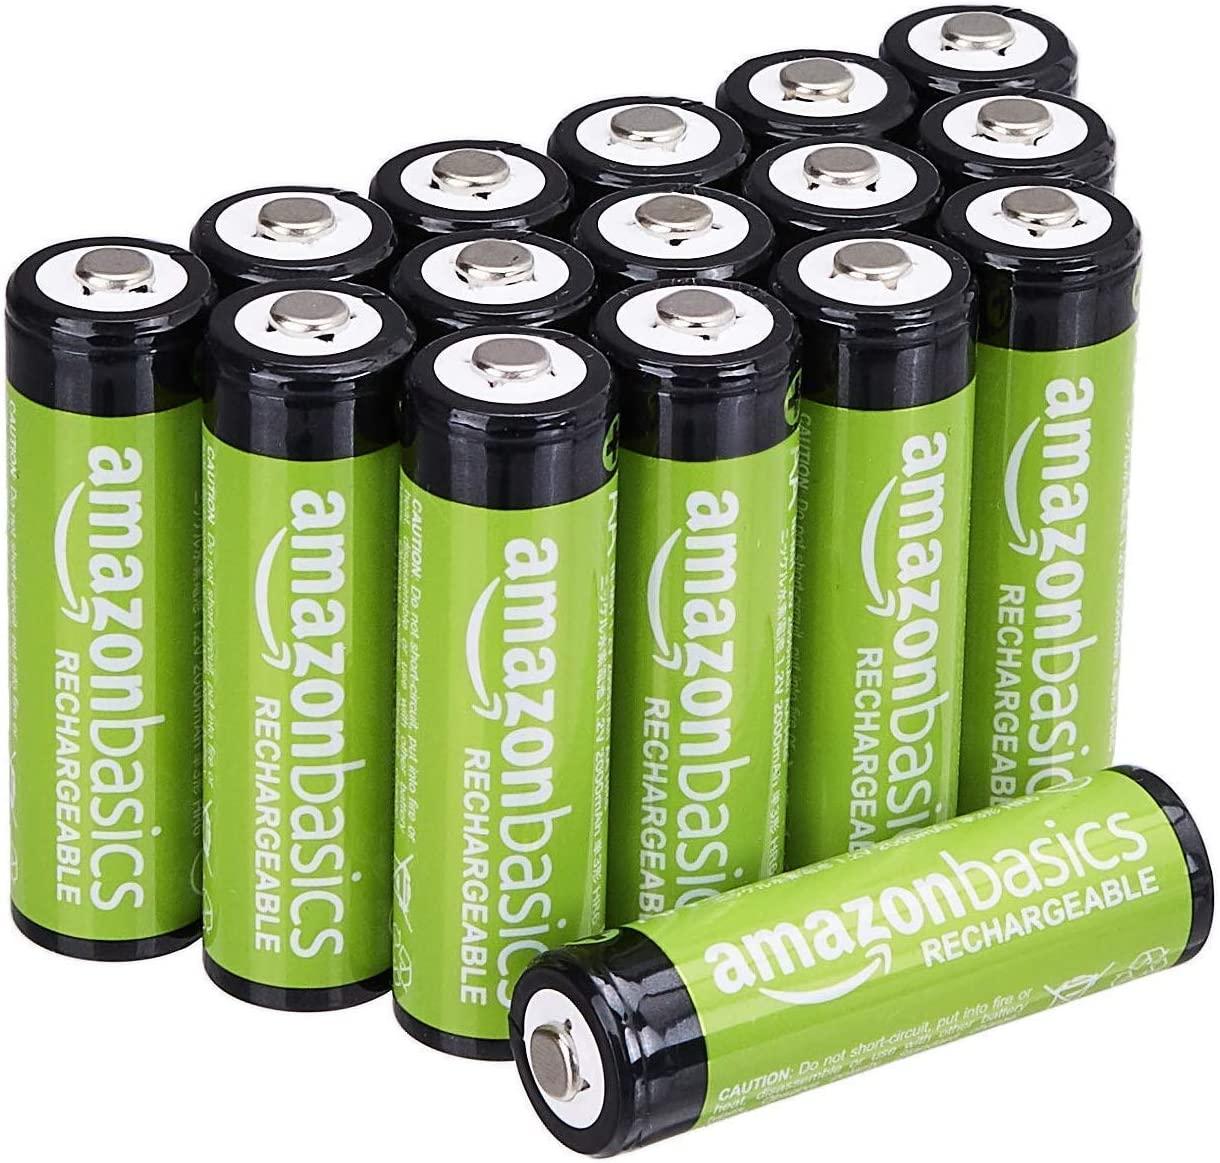 Amazon Basics 2000mAh AA Rechargeable Batteries 16 Pack for $17.80 Shipped